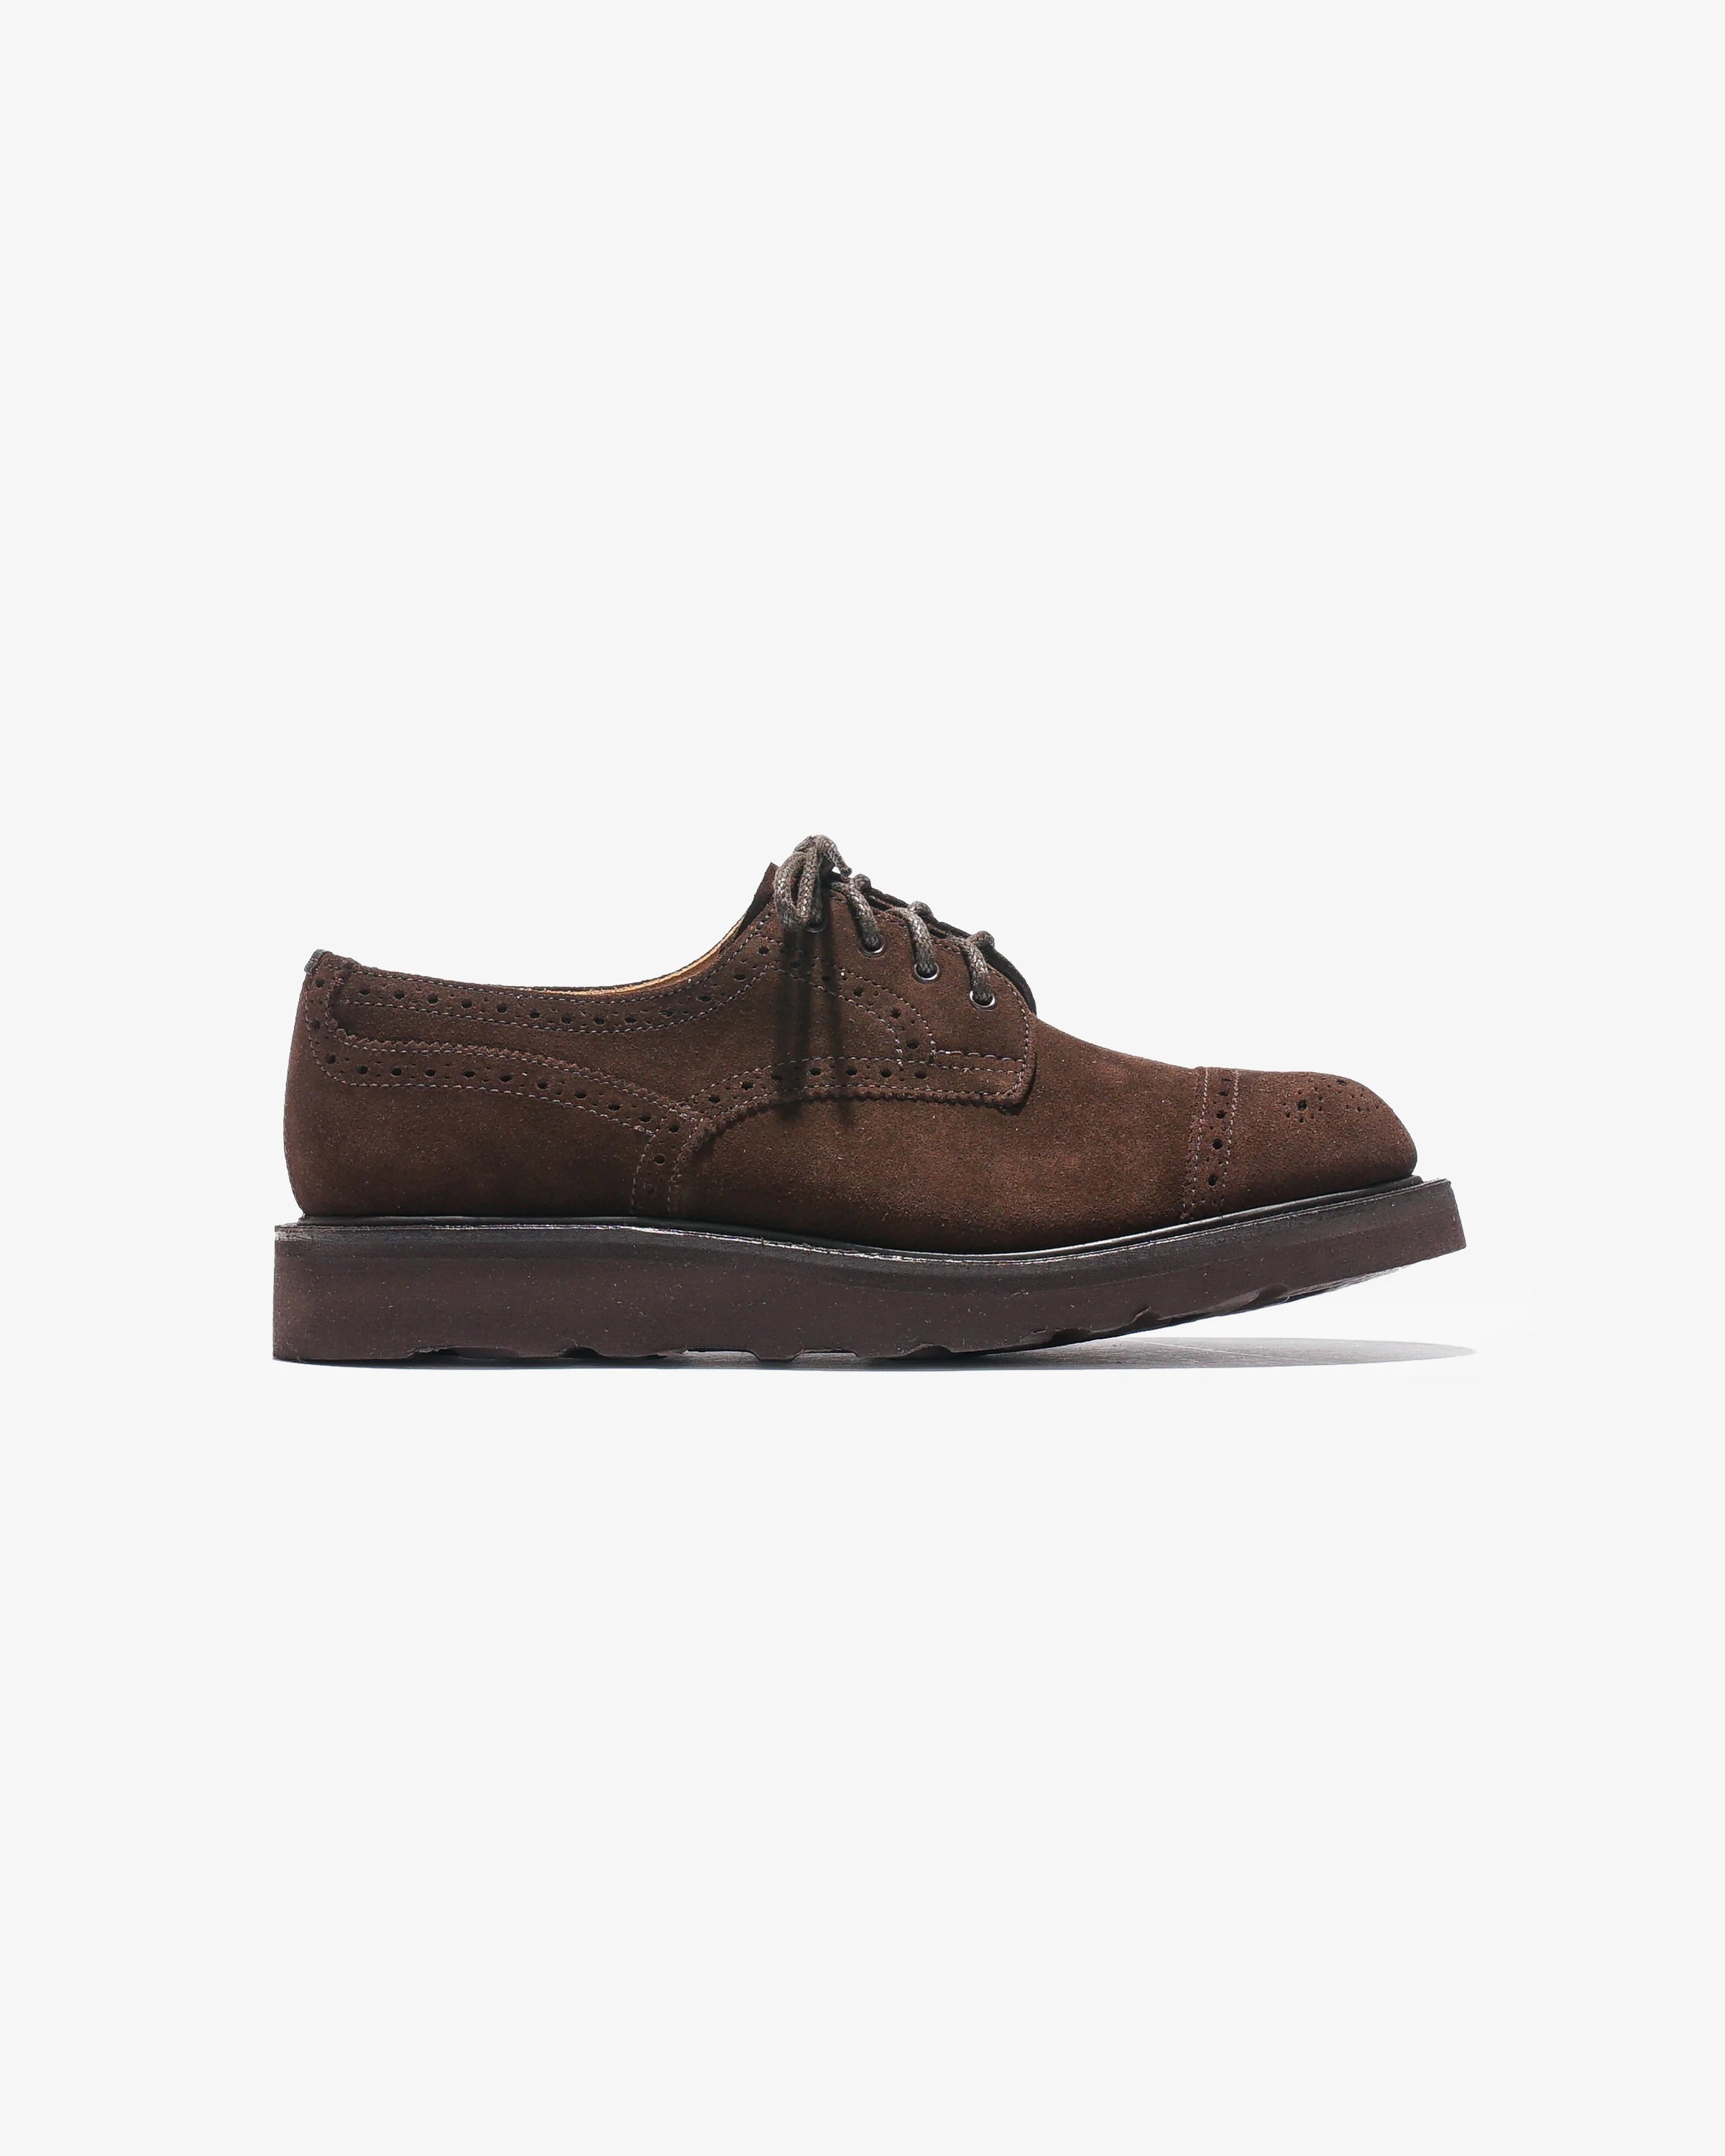 Tricker's x Nepenthes Asymmetric Gibson Brogues - Moreflex Sole - Brown Suede – Tricker's x Nepenthes – Nepenthes London